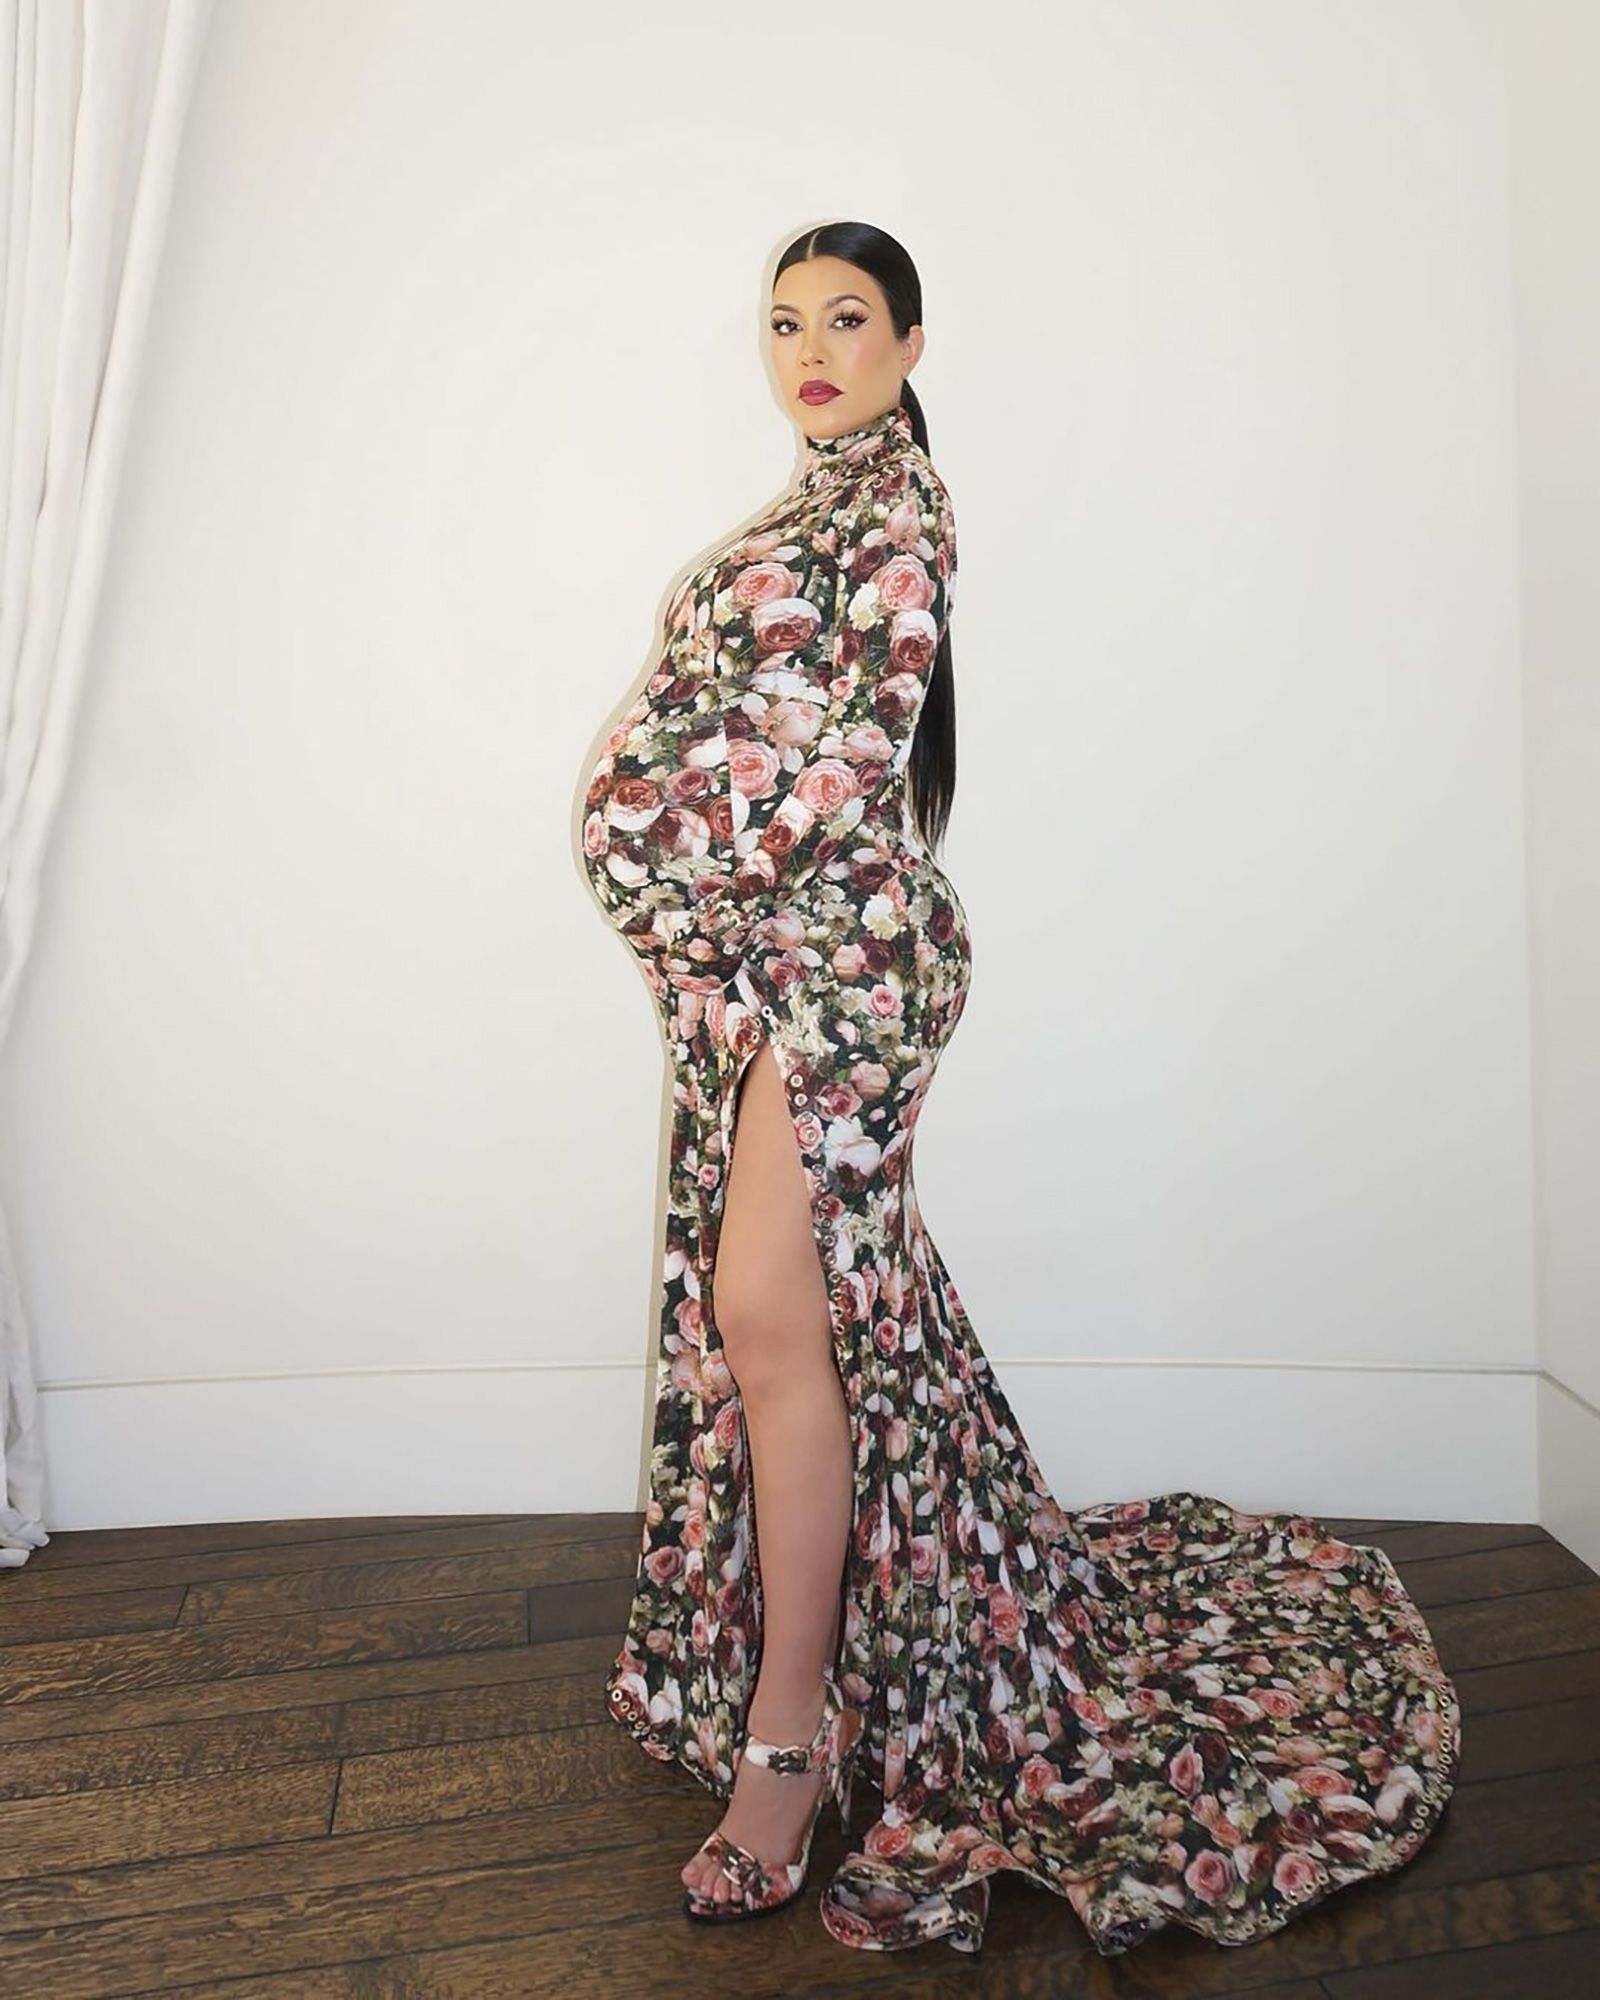 Kourtney Kardashian took advantage of her baby bump, going as pregnant Kim in a divisive Met Gala look from 2013.